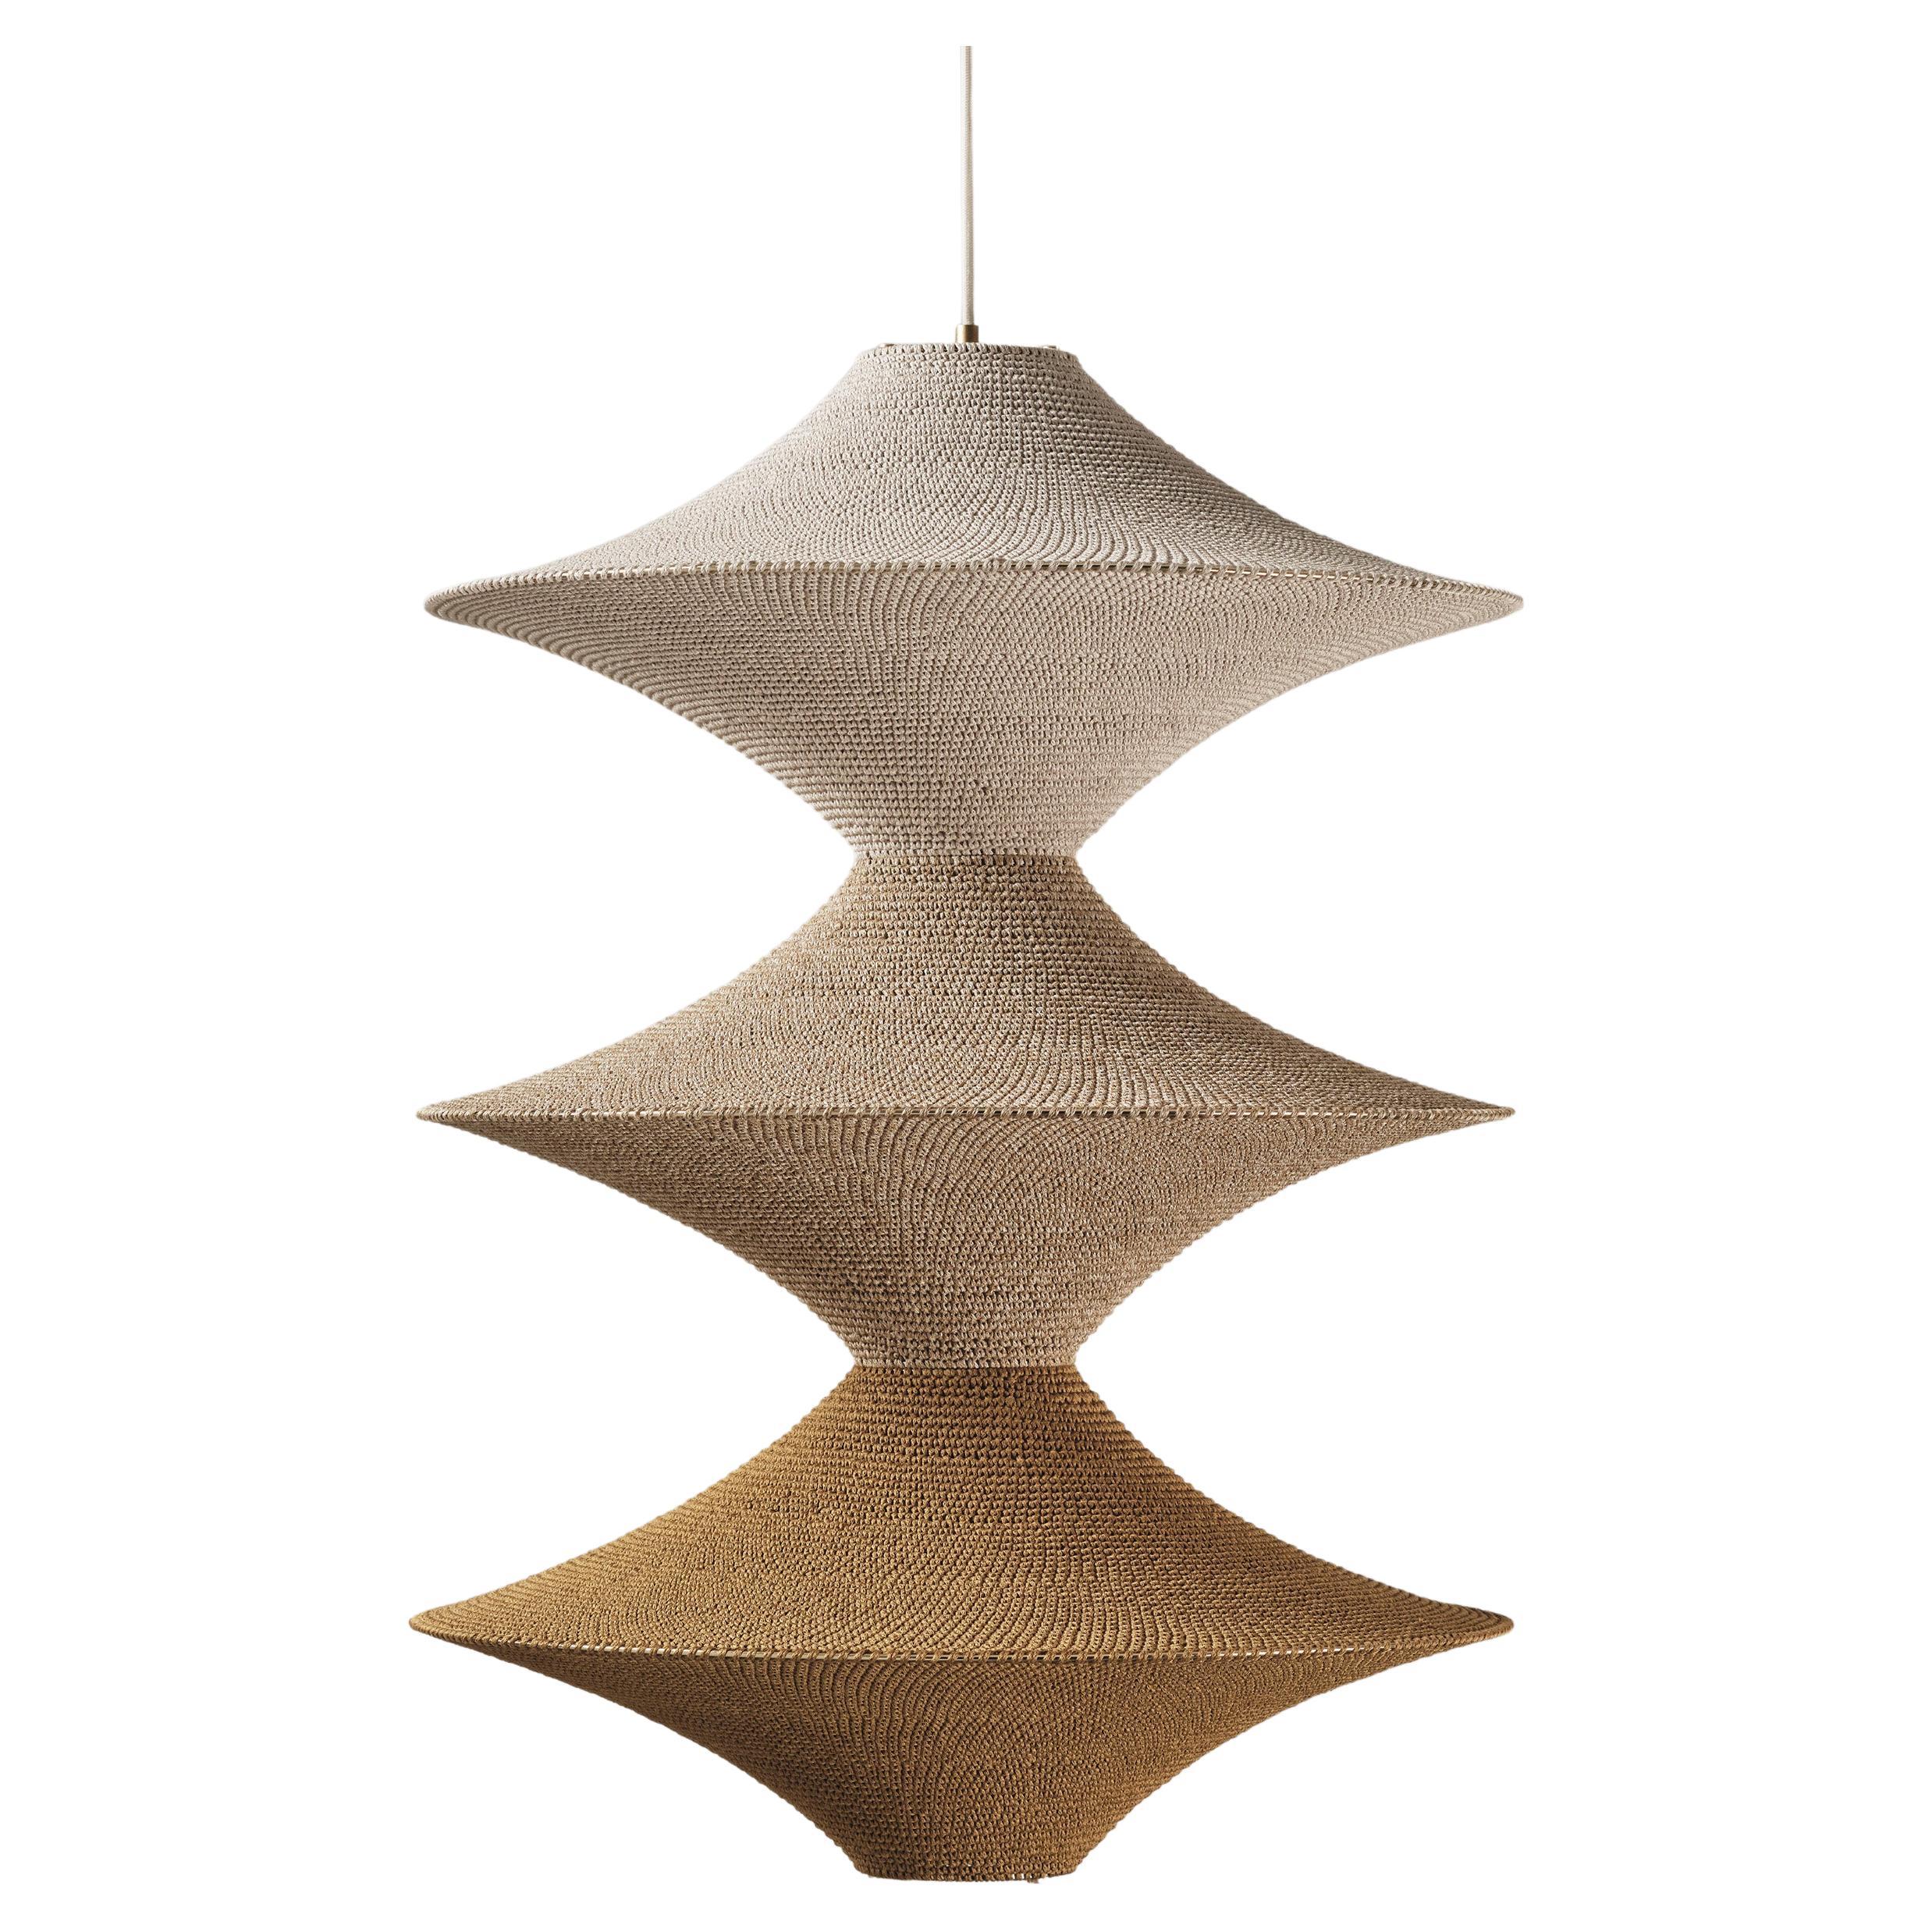 SOLITAIRE 03 Pendant Light Ø100cm/39.4in, Hand Crocheted in Egyptian Cotton For Sale